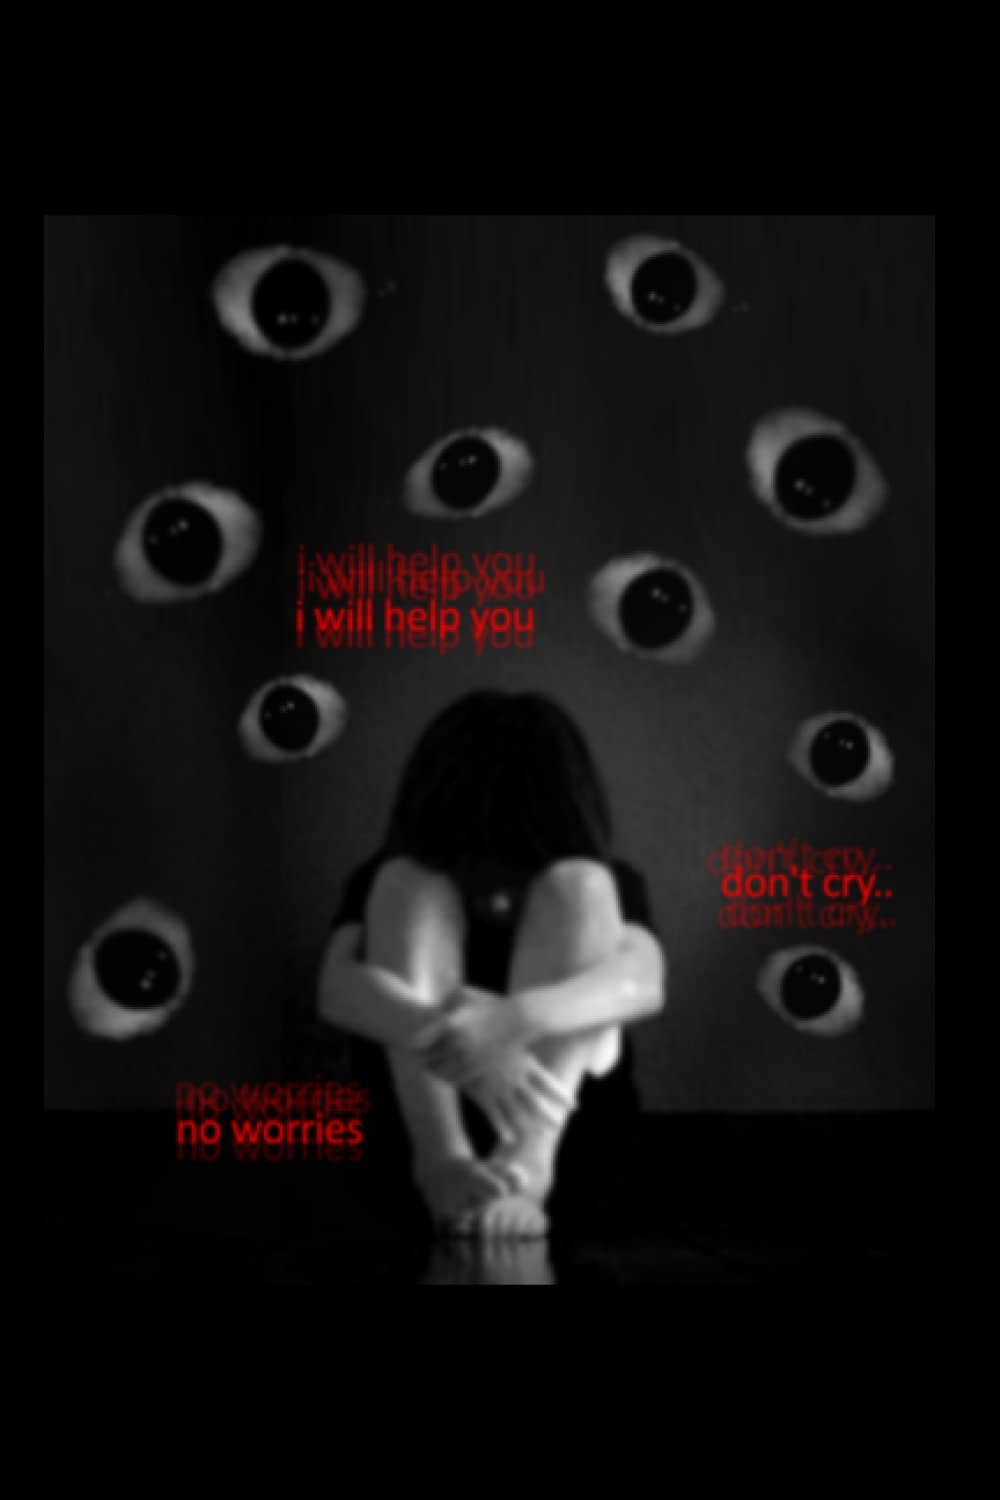 A girl is sitting on the floor with her hands wrapped around her knees. She is looking down at the floor and there are many eyes surrounding her. The text says 